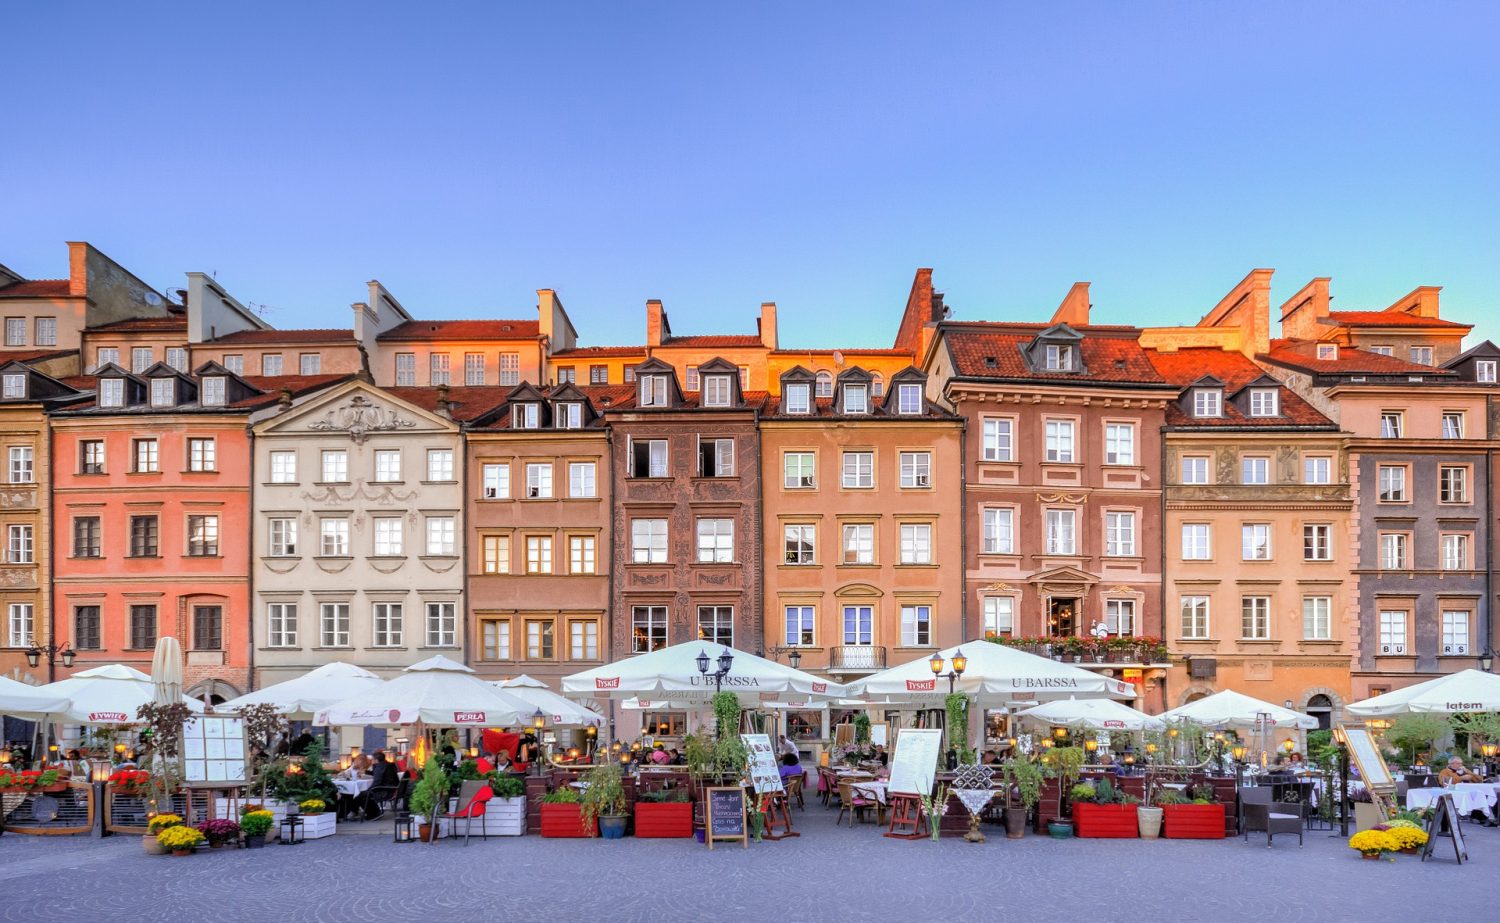 Who can manage real estate? Warsaw as a perfect place to rent premises